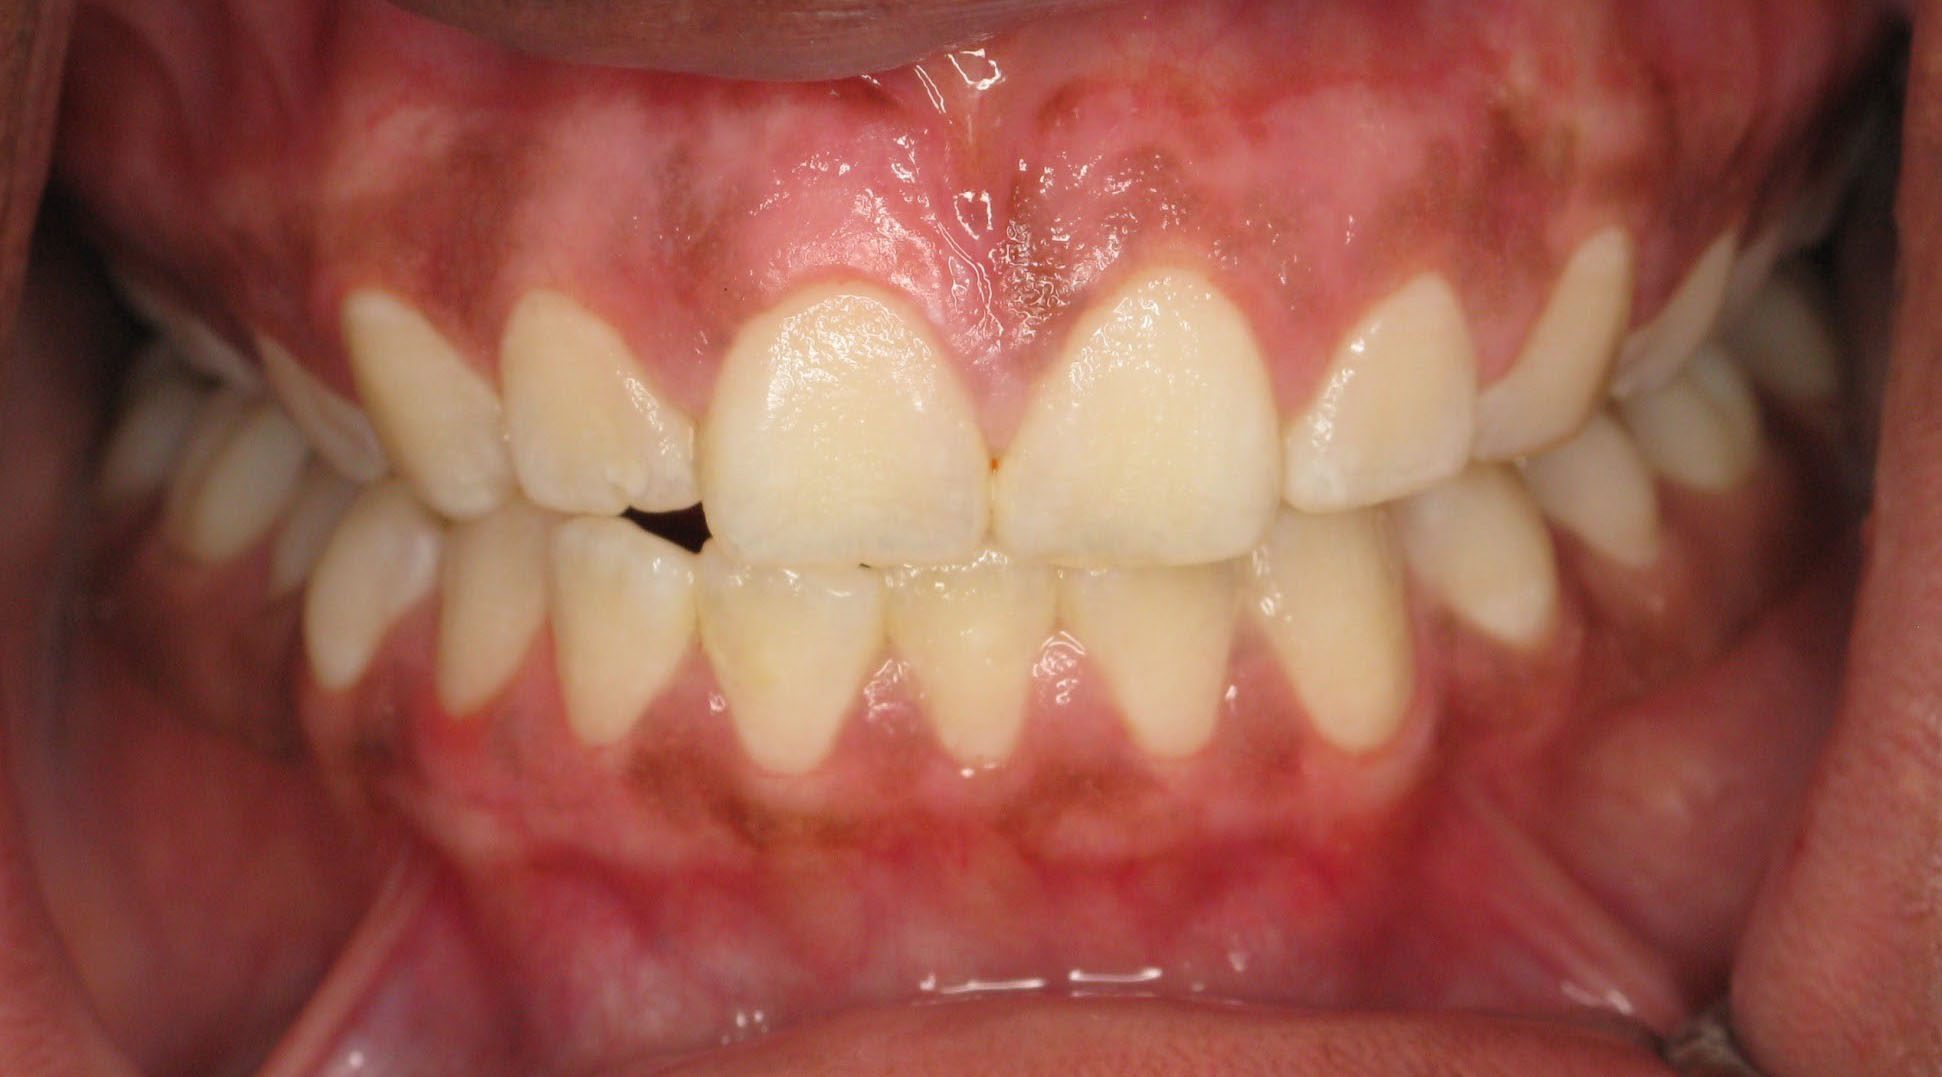 Gums Lightened to Match Rest of Mouth